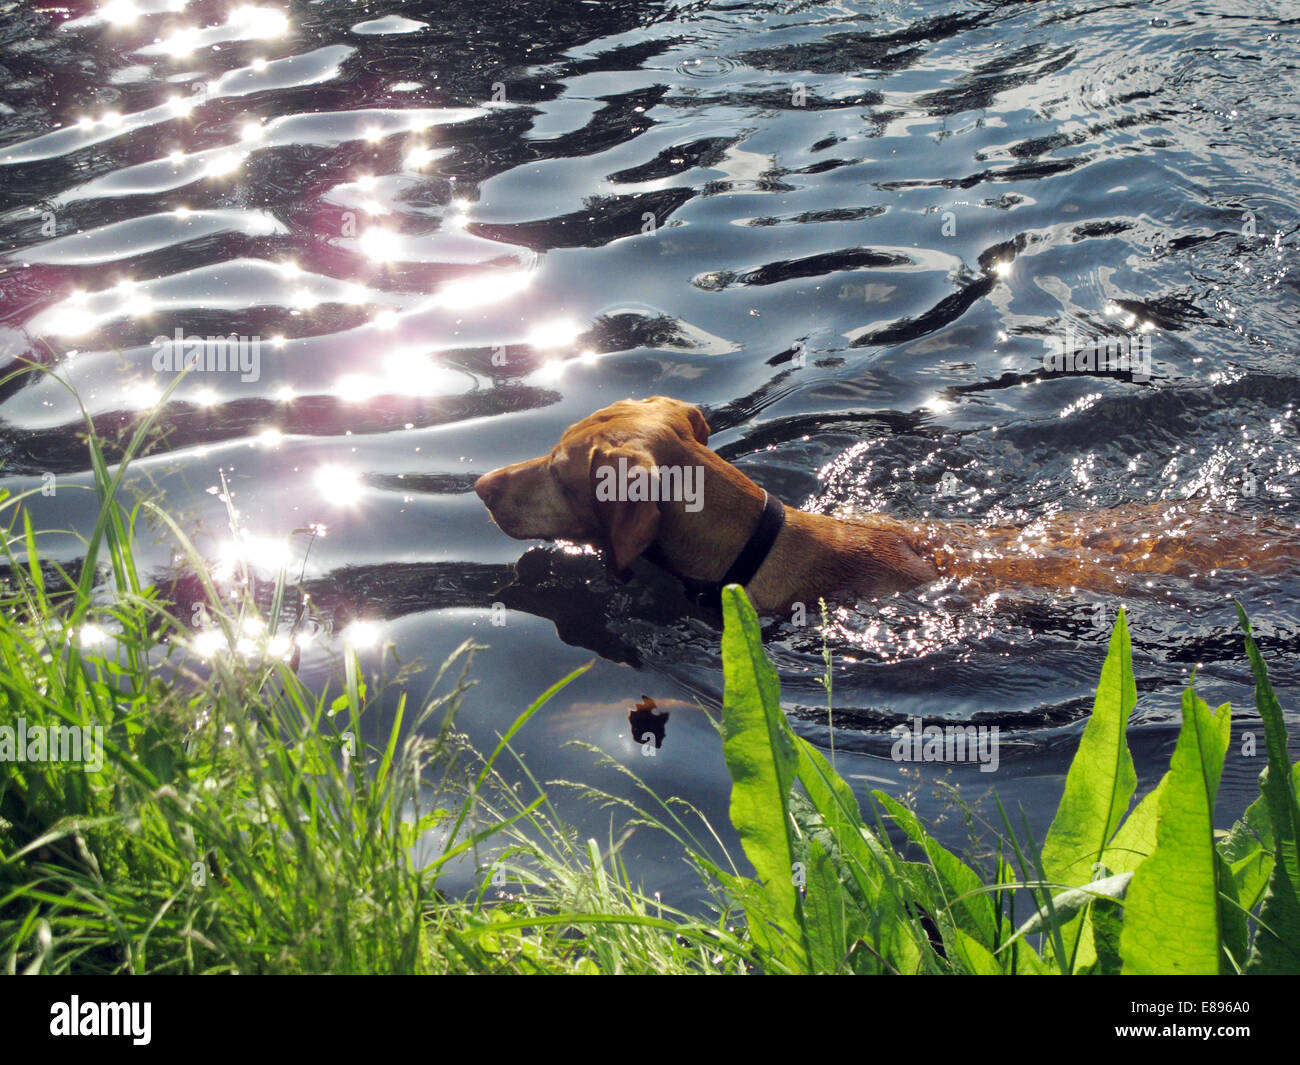 Berlin, Germany, dog swims in the water Stock Photo